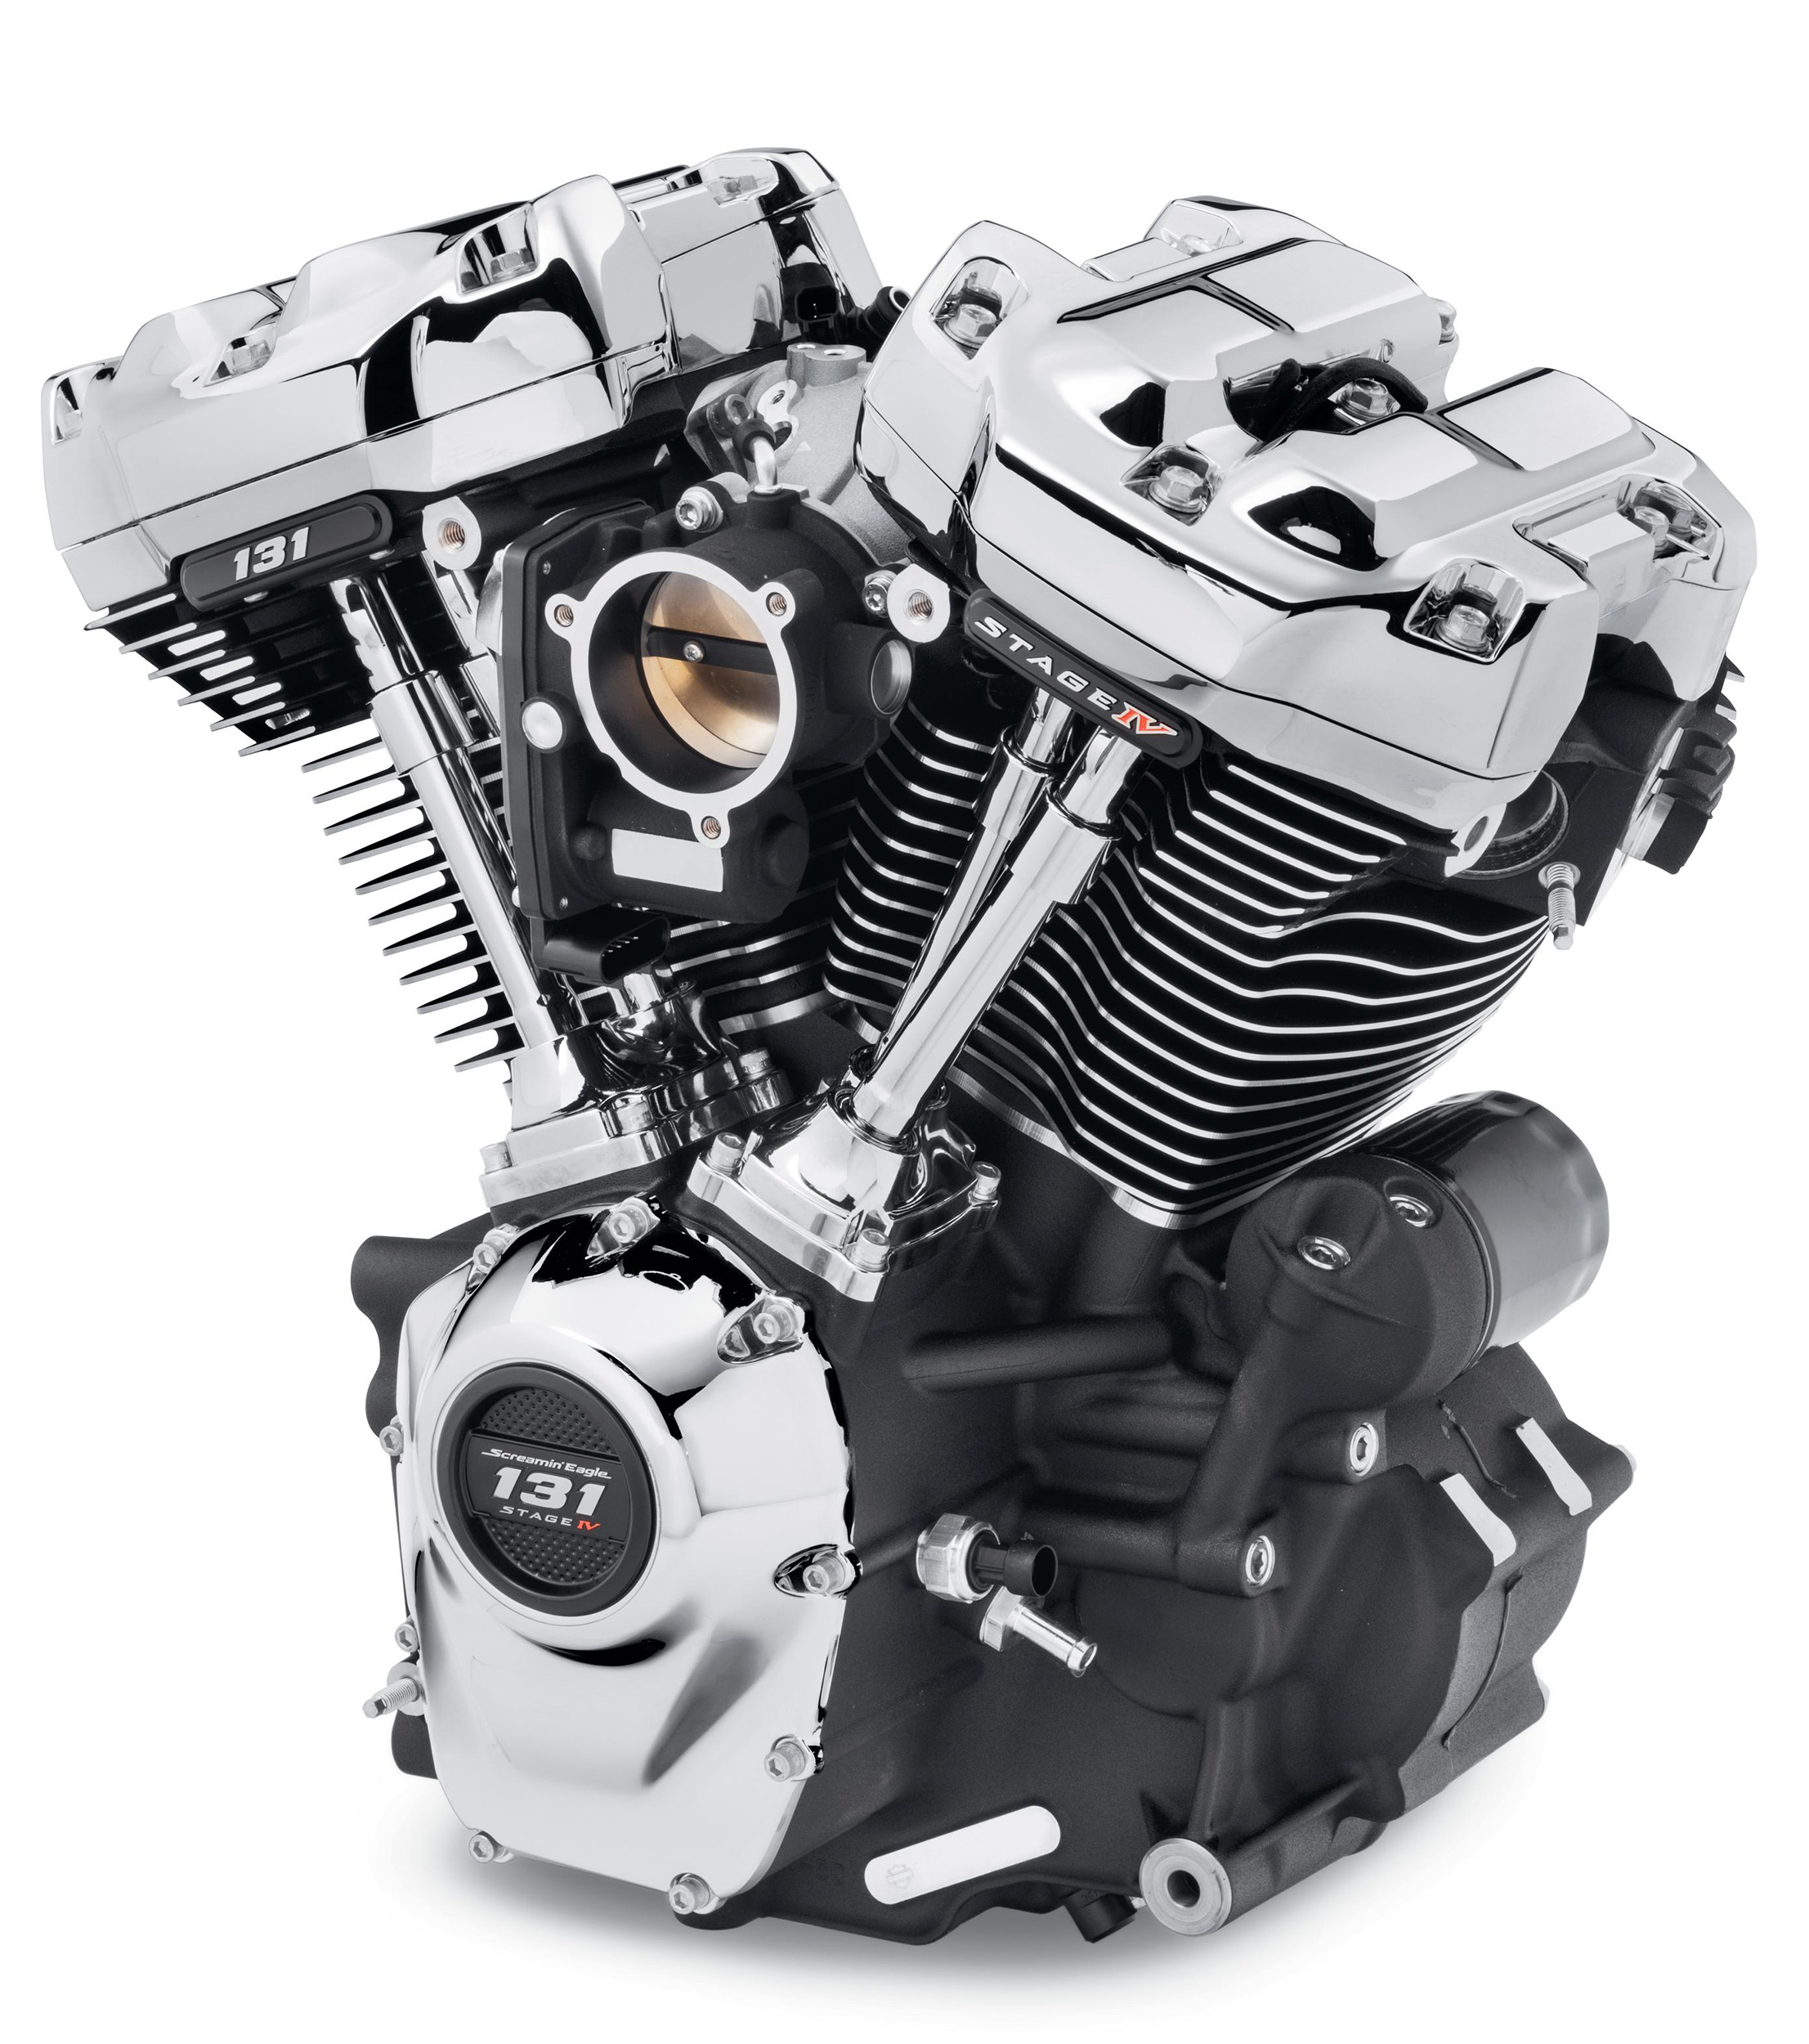 New Screamin' Eagle 131 Crate Engine Offers Big Power for Select Harley ...